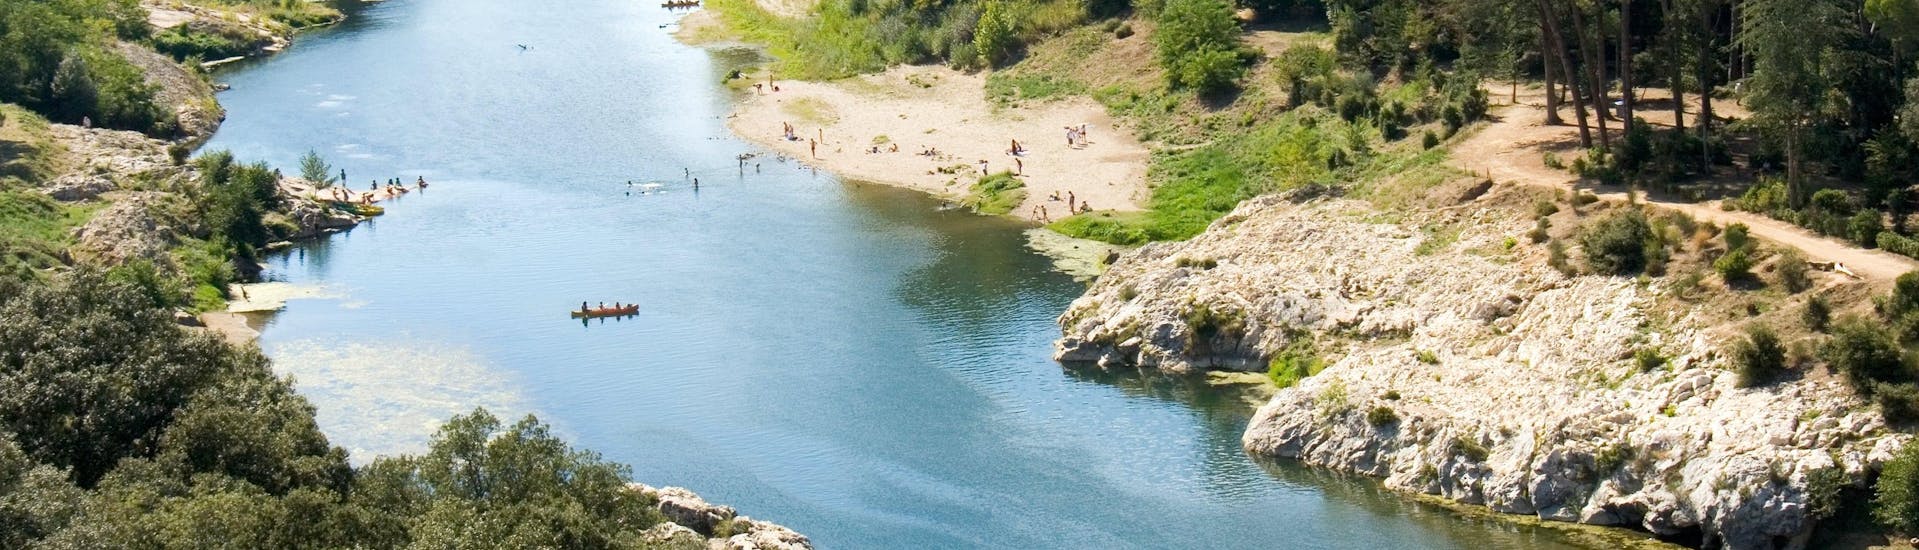 Aerial view of the Gardon, one of the popular rivers in France for canoeing, passing under the Pont du Gard.